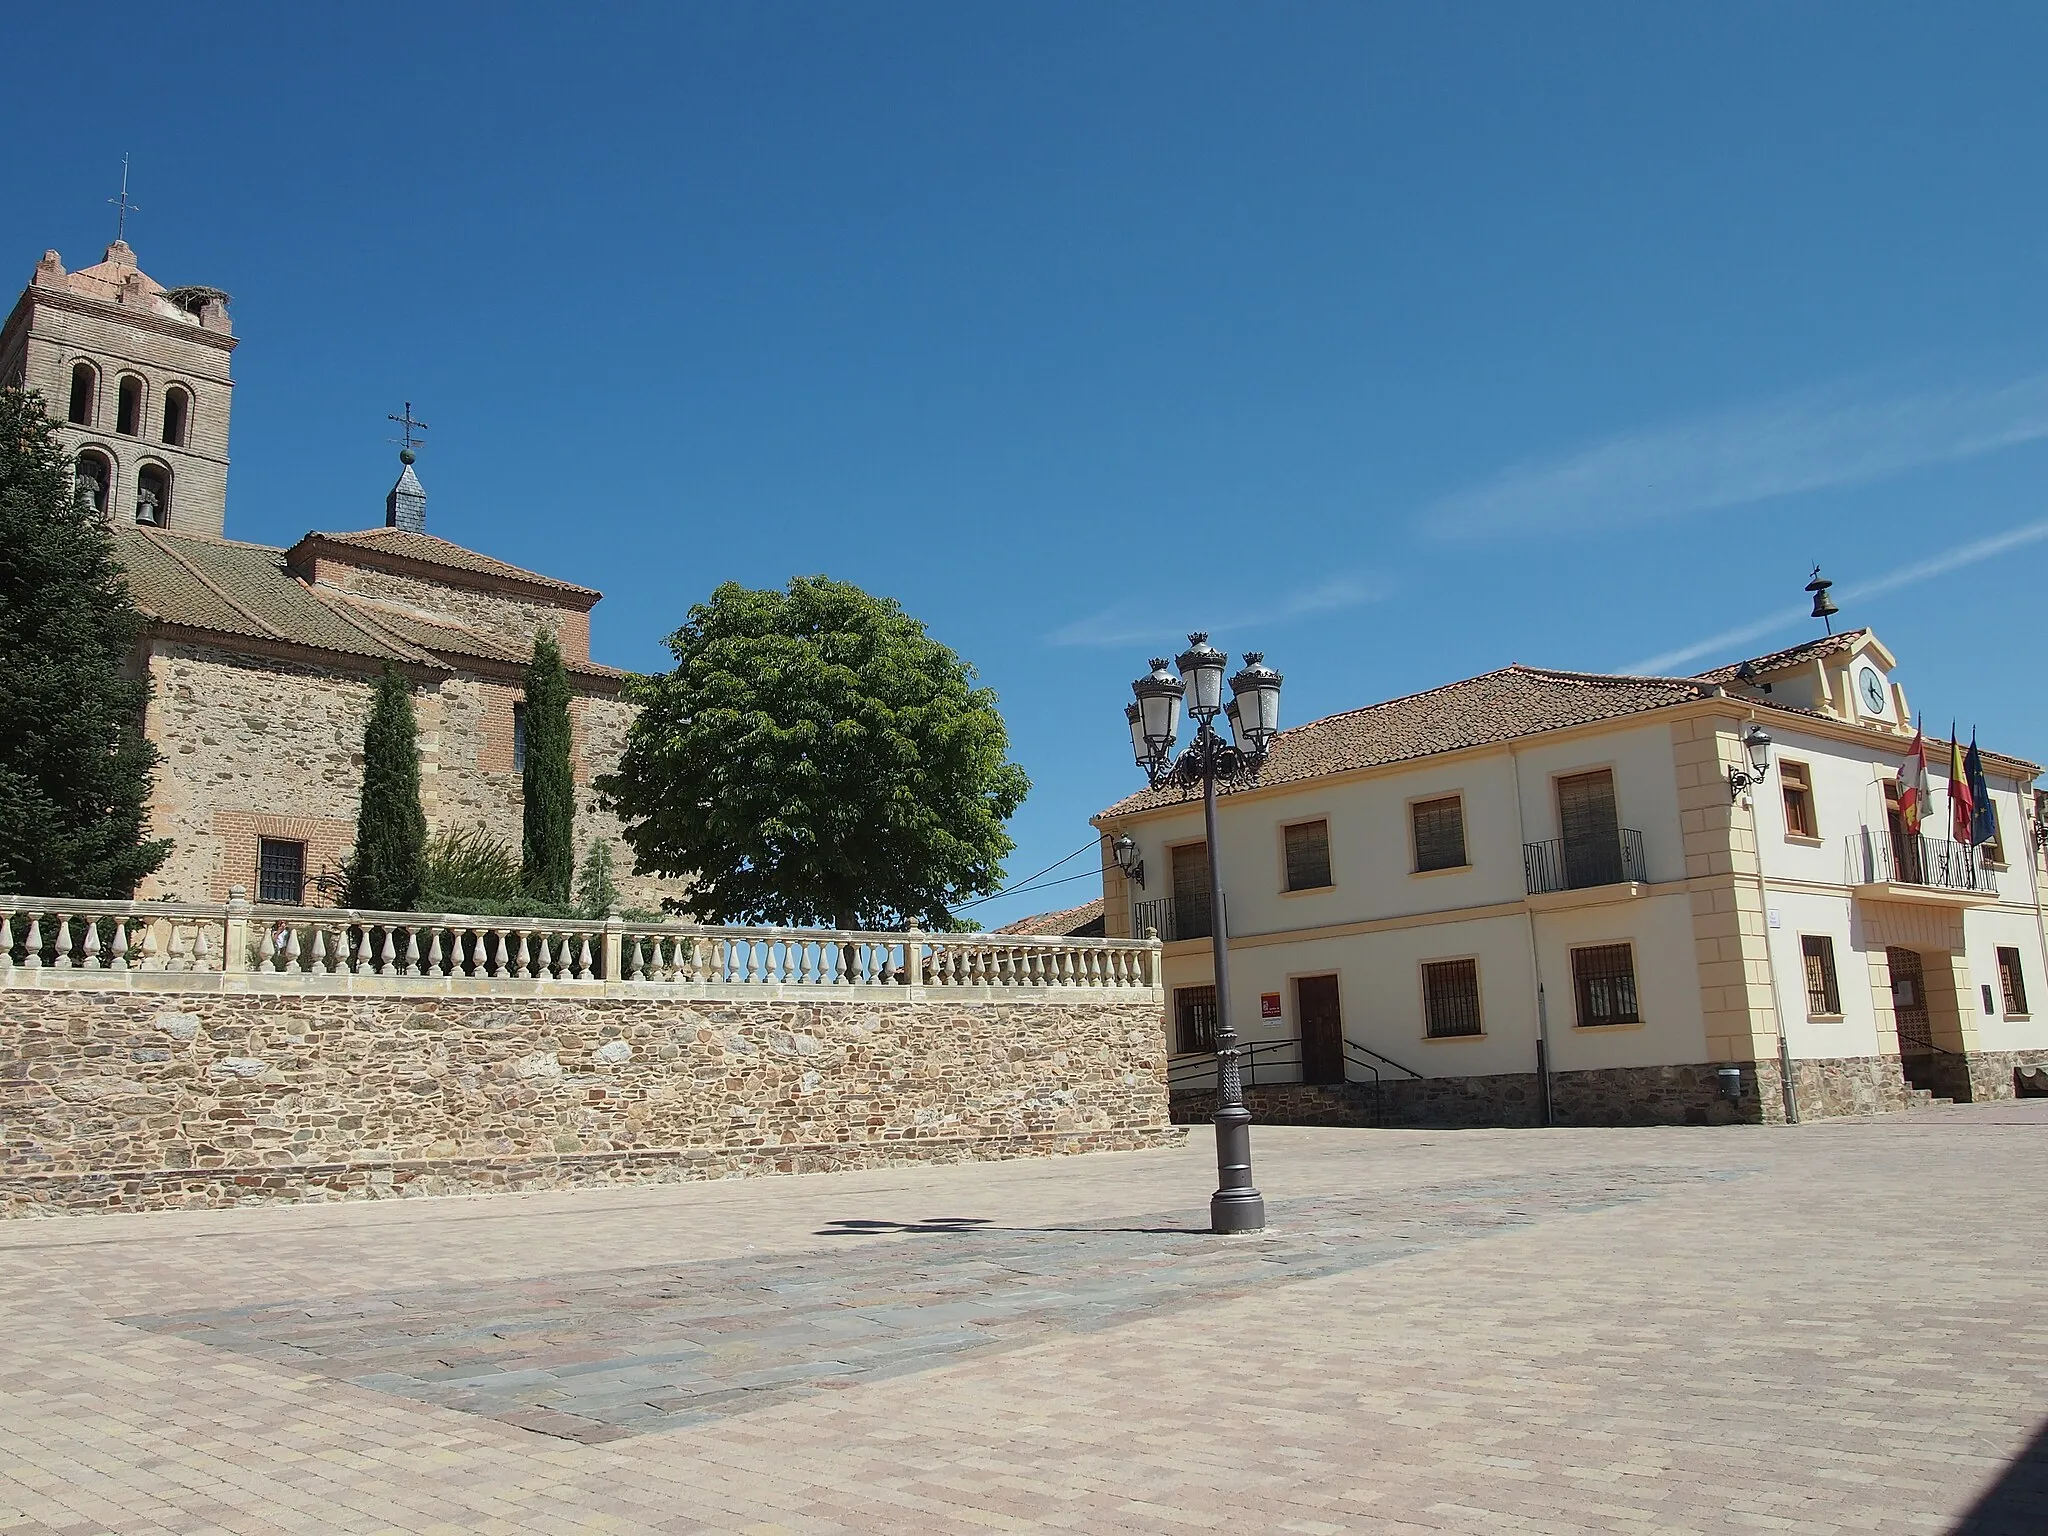 Photo showing: Main square in Migueláñez, Segovia (Spain) called Plaza Mayor. Buildings: the Town Hall on the right and the Nuestra Señora de la Asunción Church.